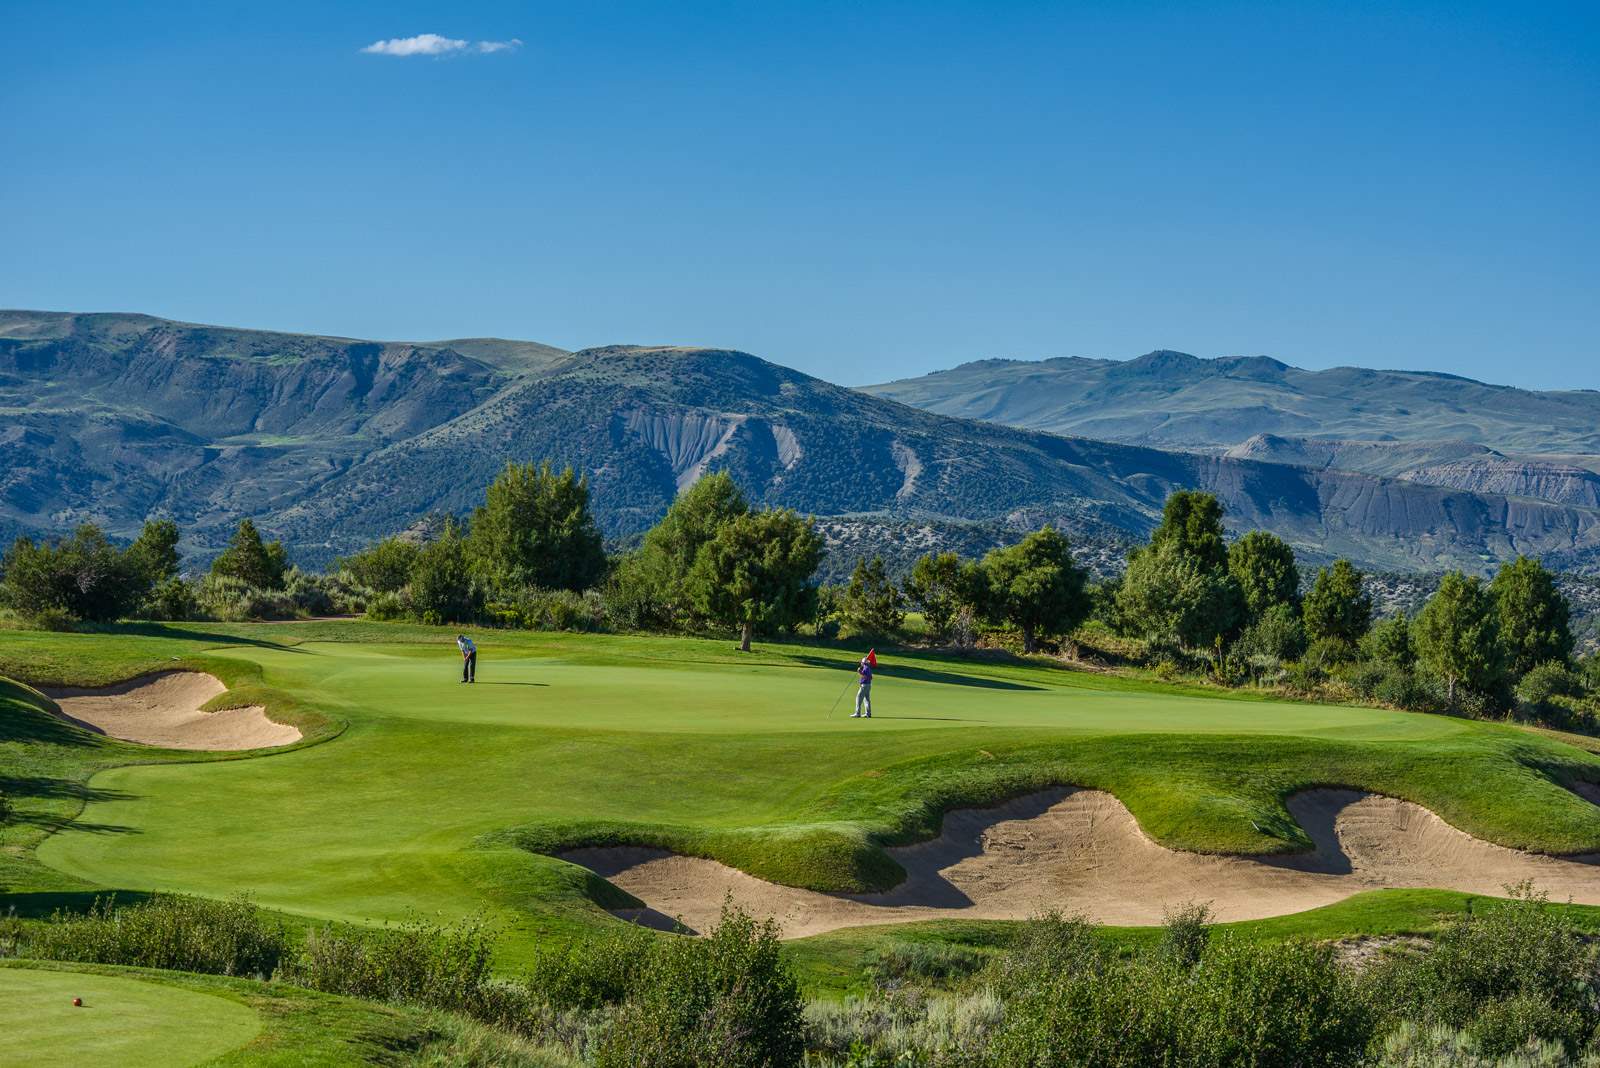 Tom Fazio's masterpiece offers breathtaking mountain vistas and an environmentally preserved golfing experience (source: Red Sky Golf Club).